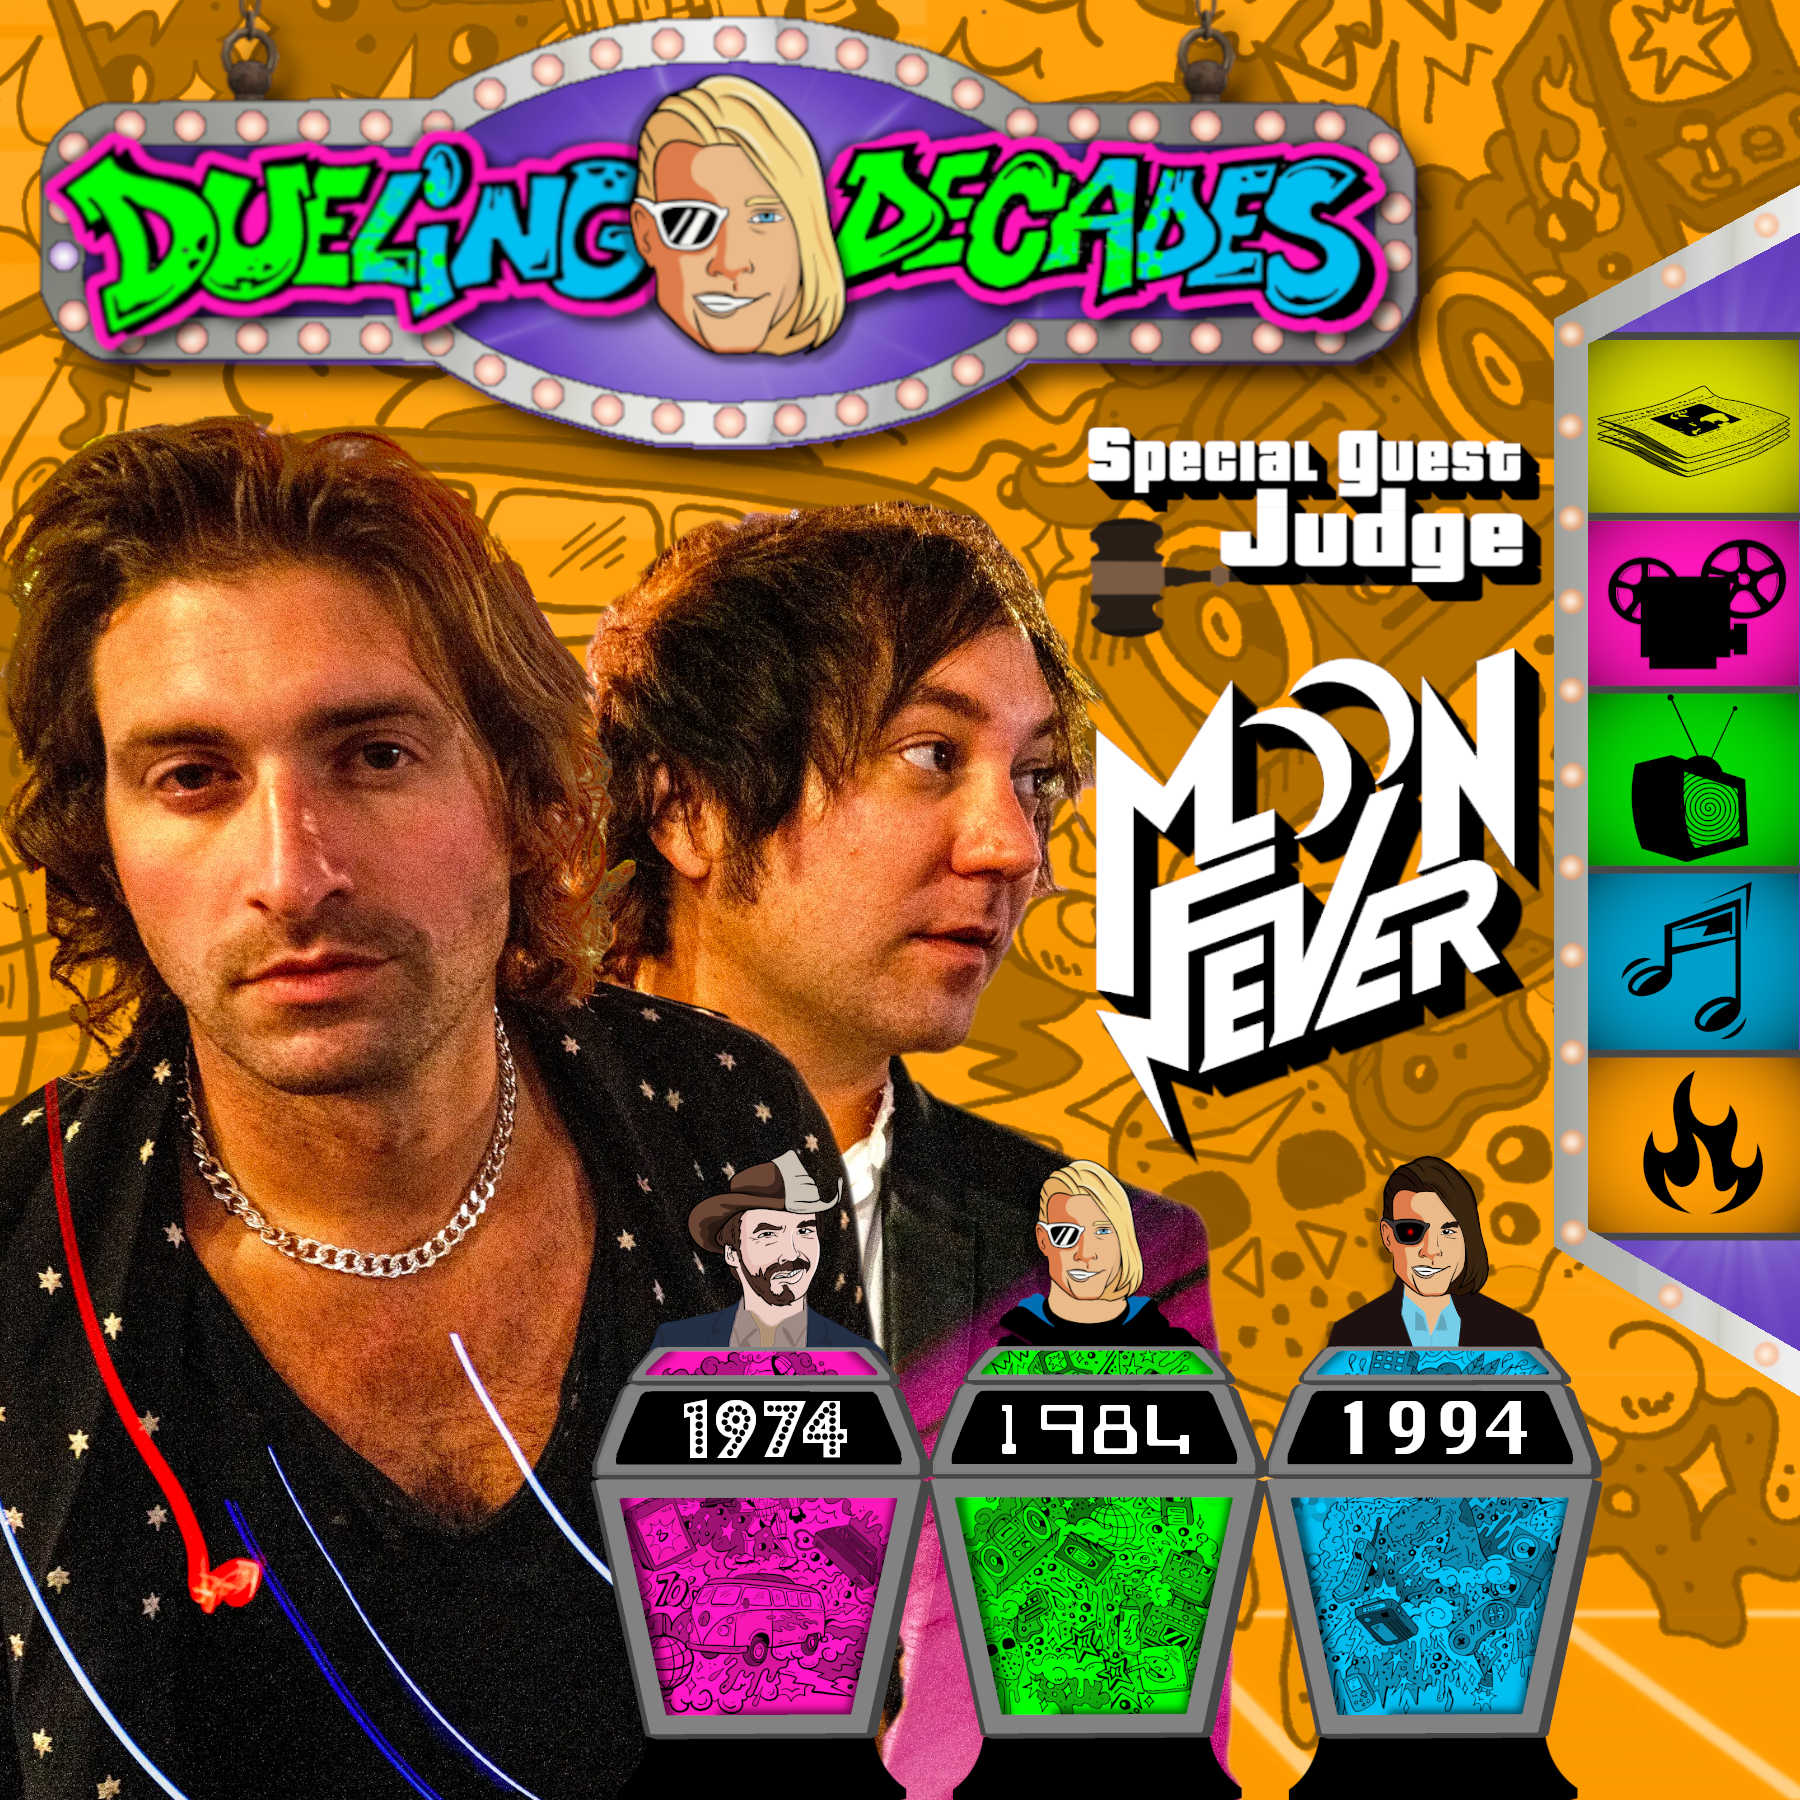 Rock band Moon Fever judges who had the best August 1974, 1984 or 1994!